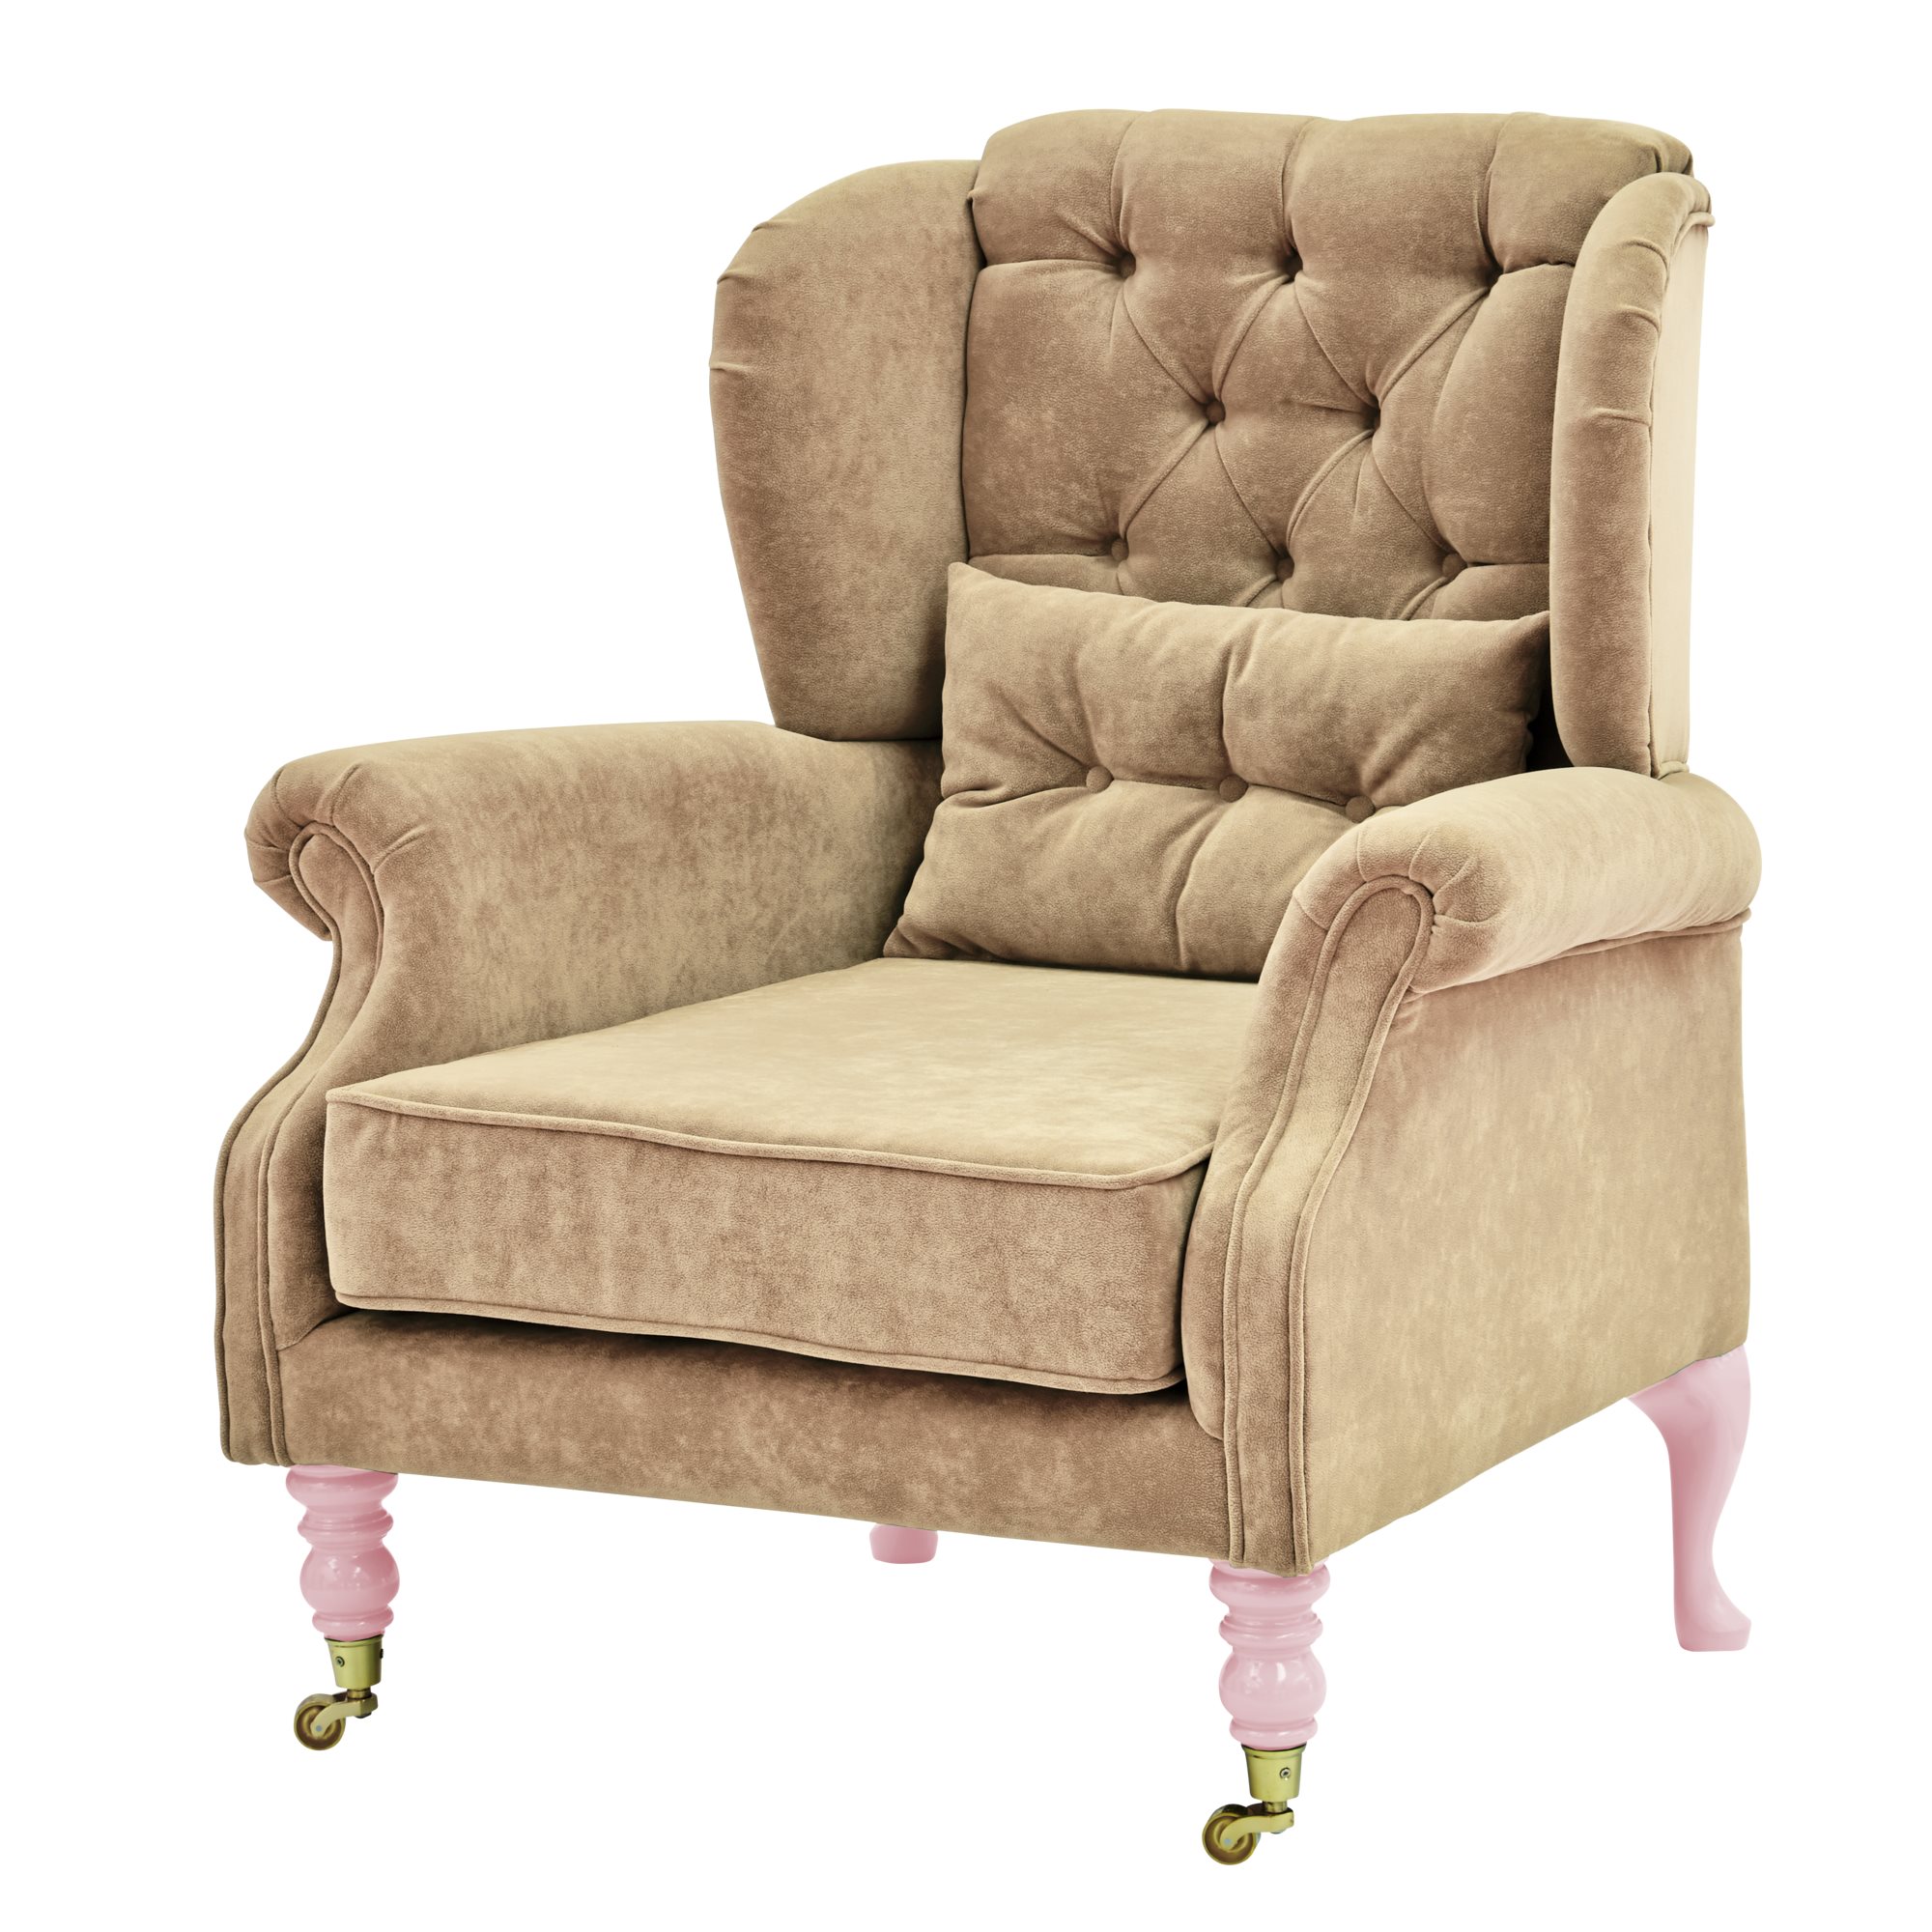 Buy Rice Velvet Wing Chair Small Cushion Beige W Soft Pink